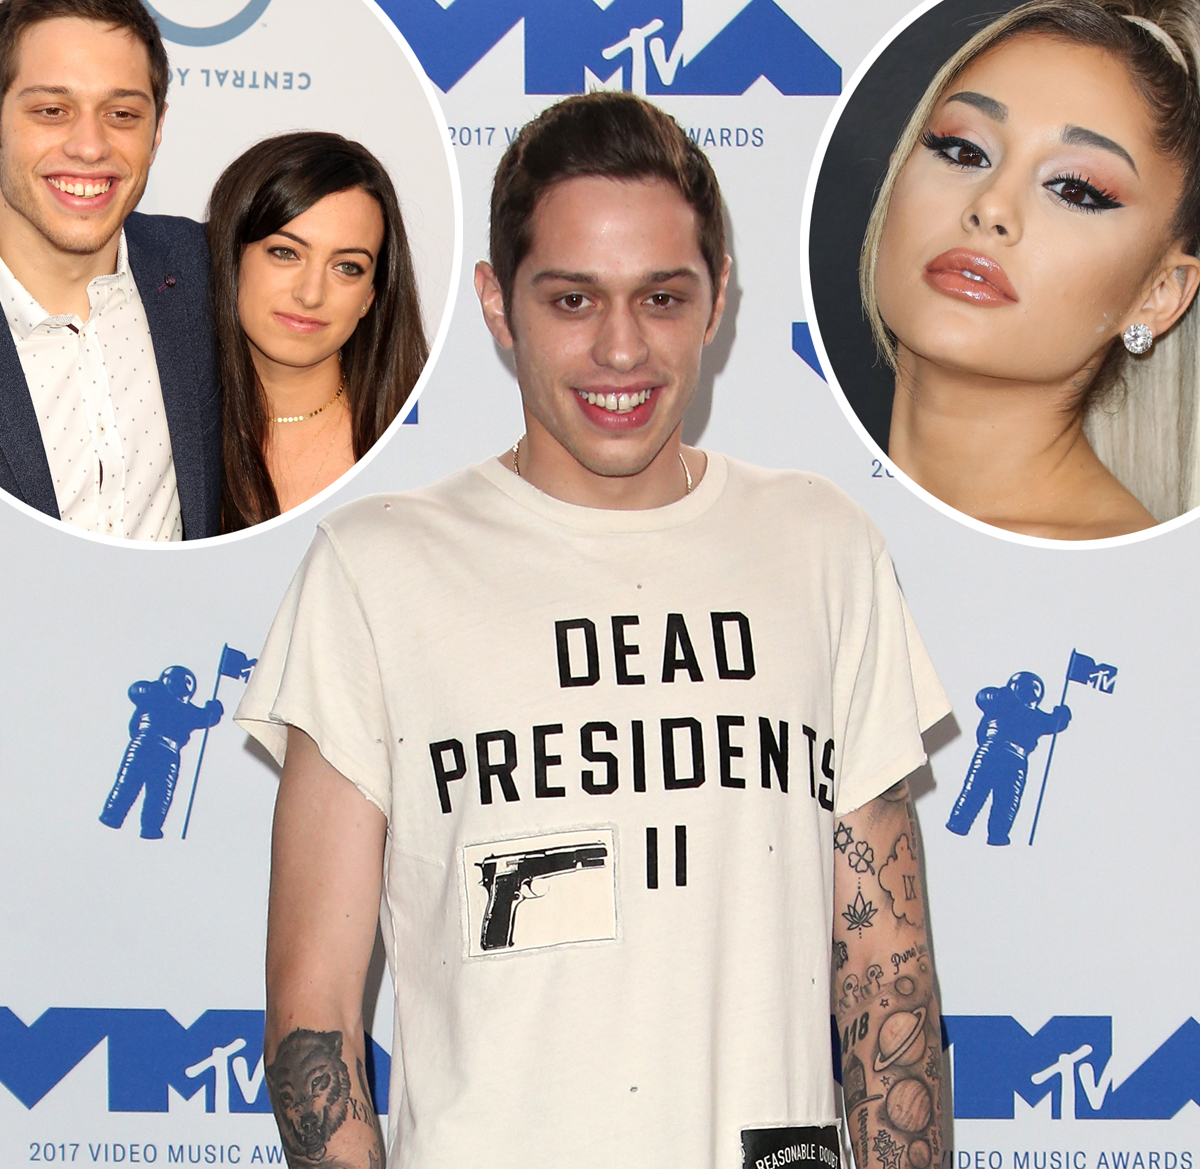 Pete Davidson covers up and removes tattoos